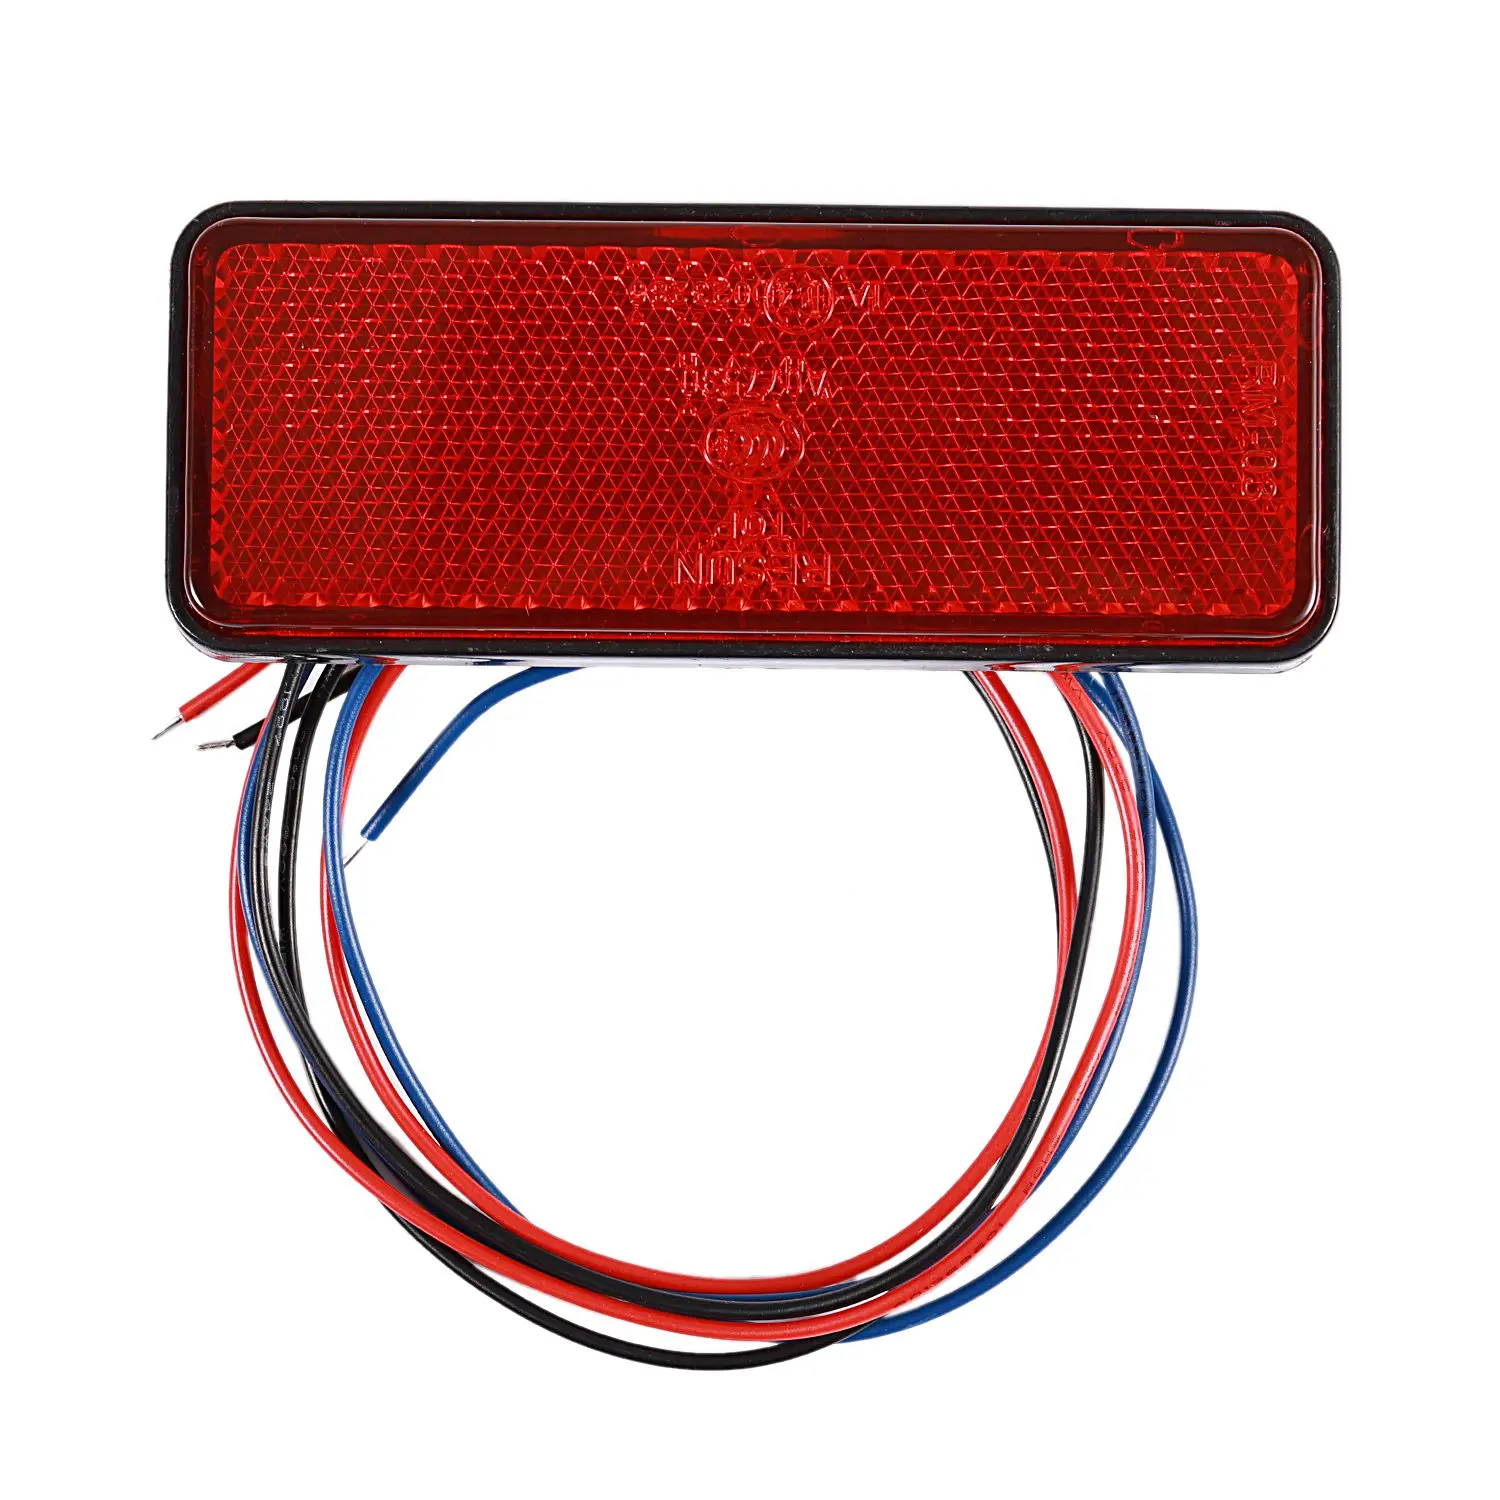 

LED Reflector Red Rear Tail Brake Stop Marker Light Truck Trailer SUV Motorcycle